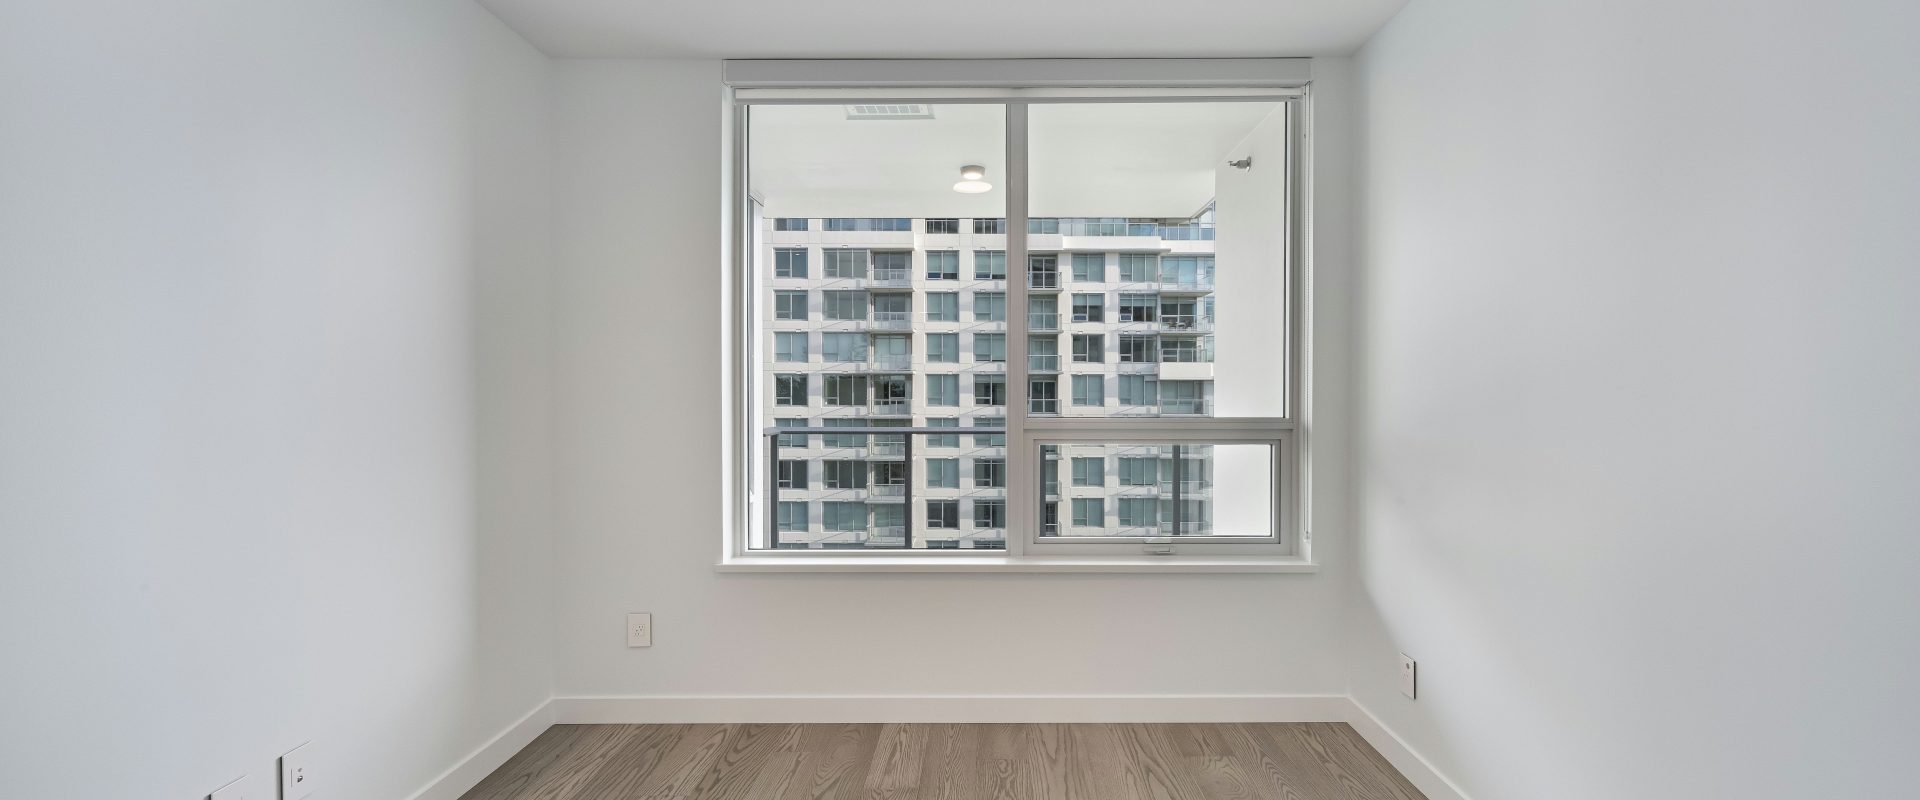 Brand New 2br 2ba Condo in White Rock with Wonderful Views of the Sea!